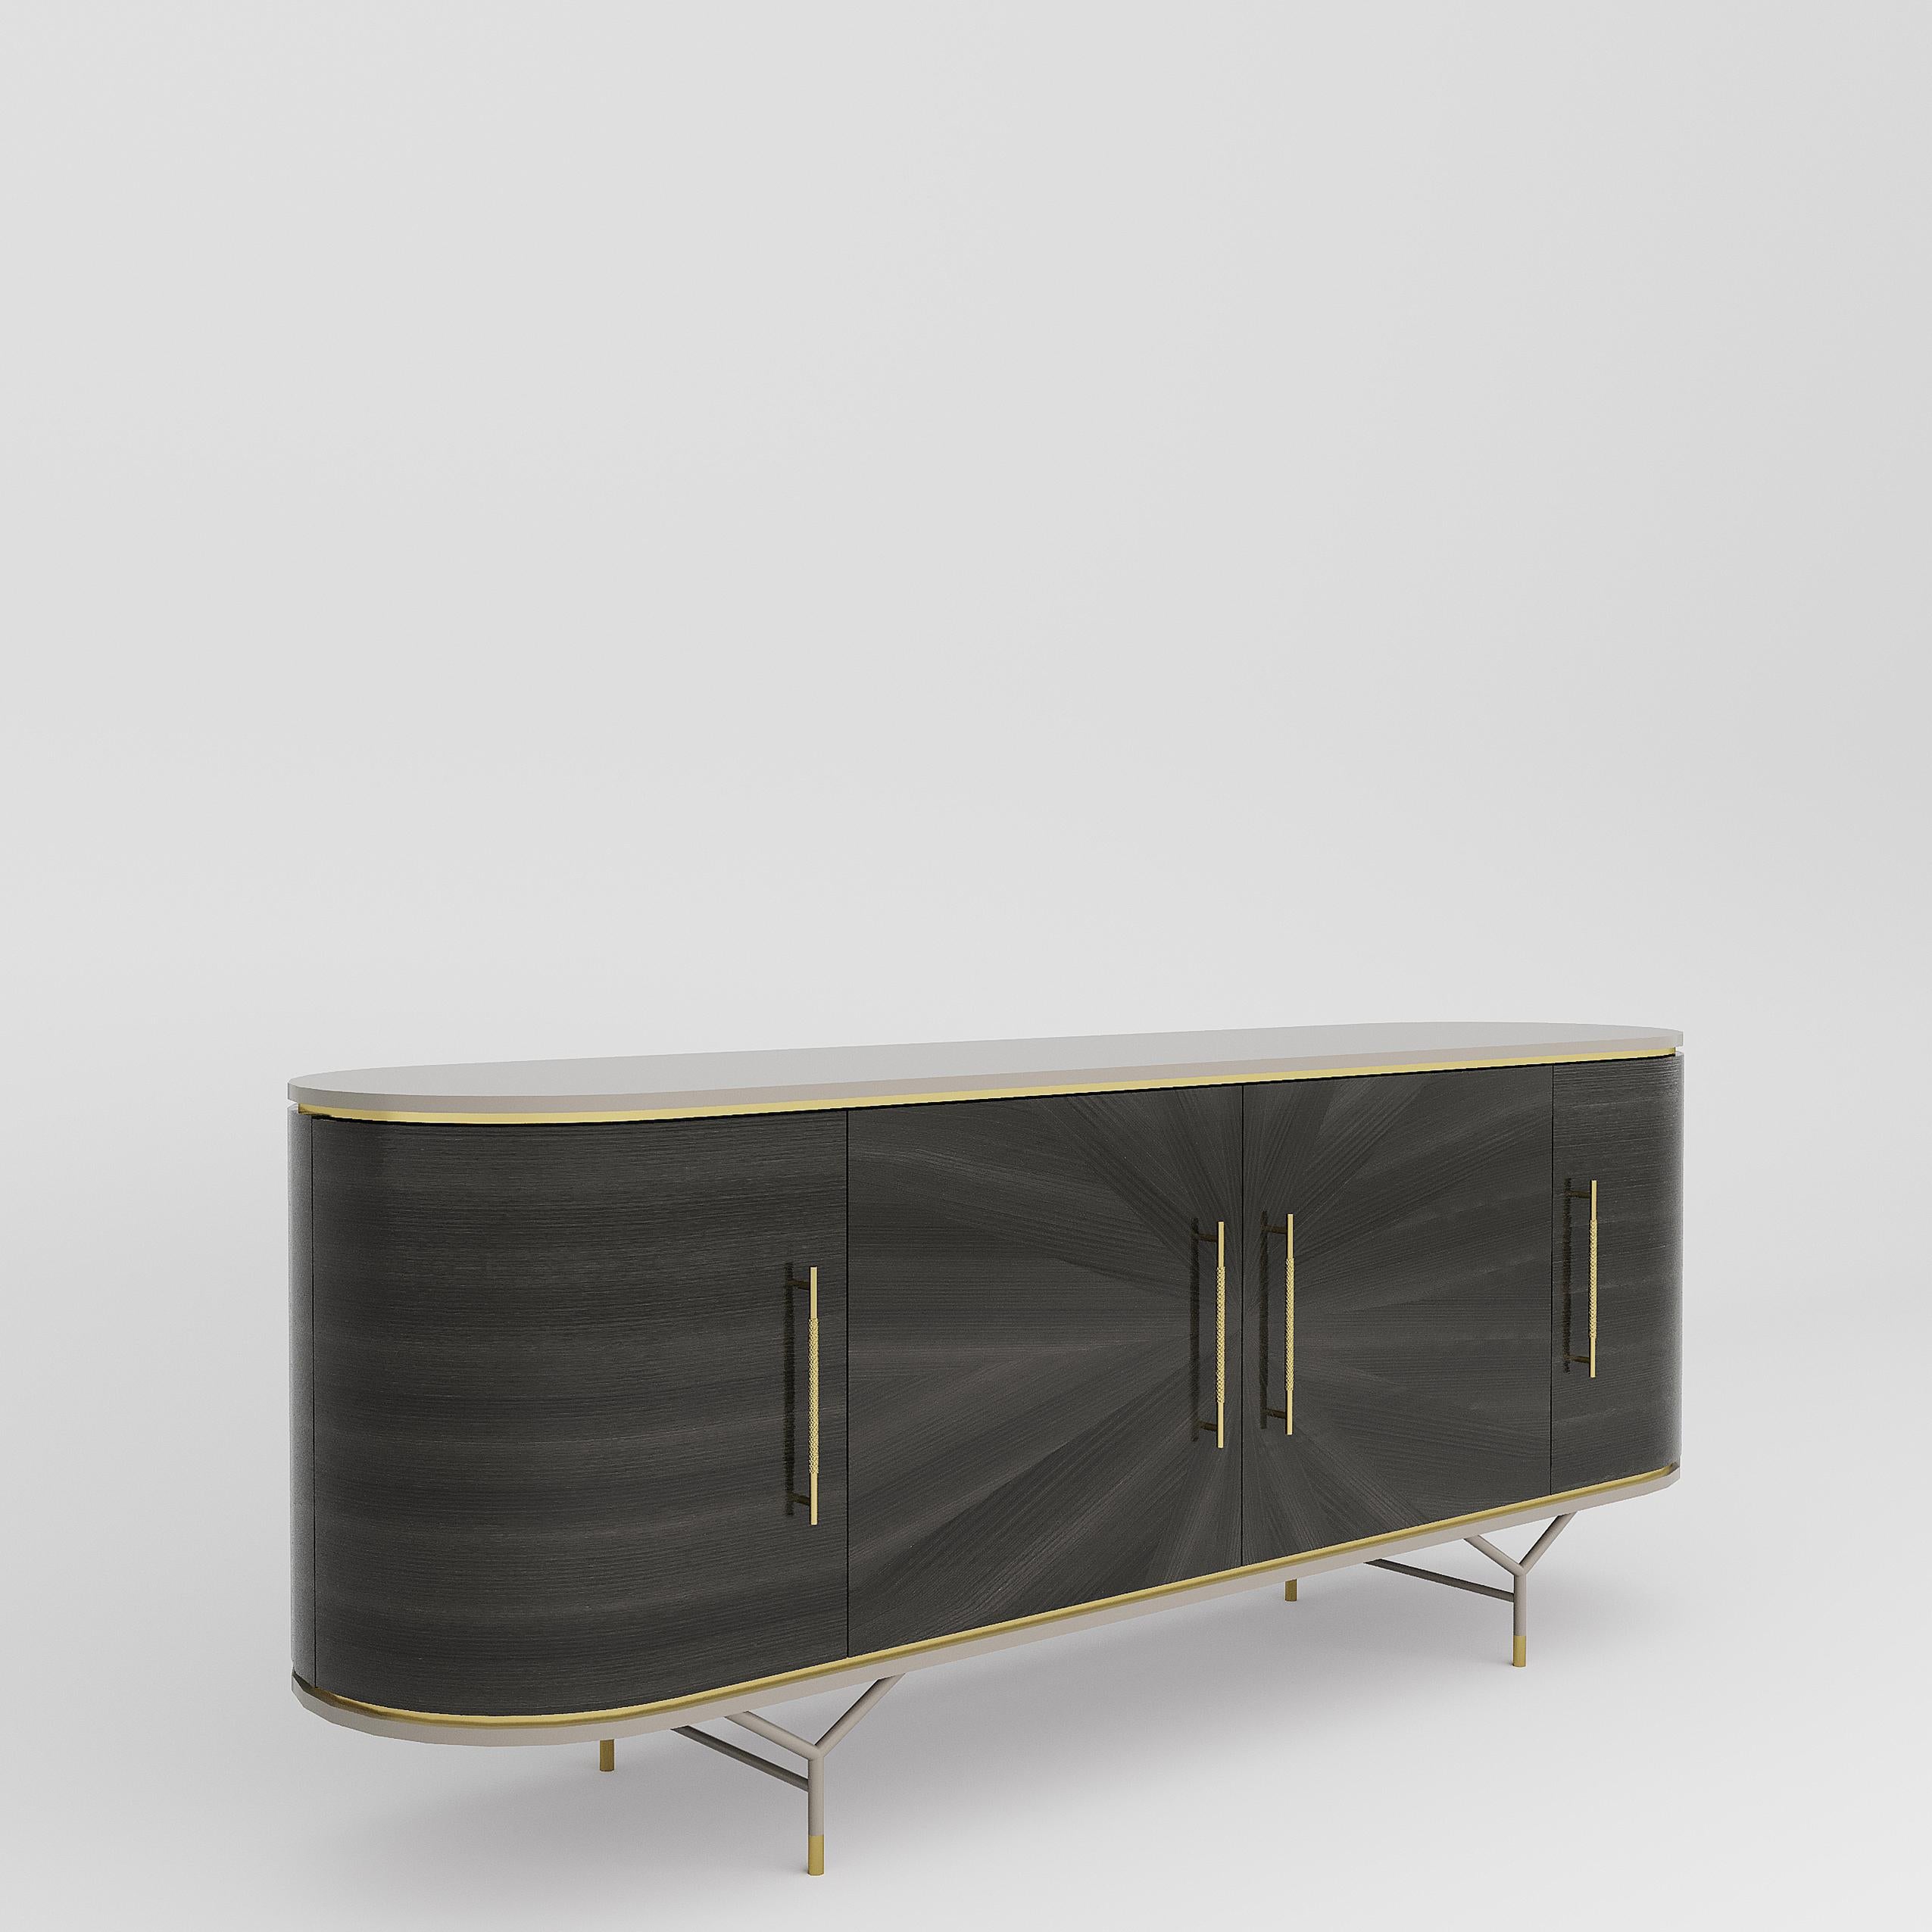 Portuguese BOGART wood sideboard with Brass handles For Sale